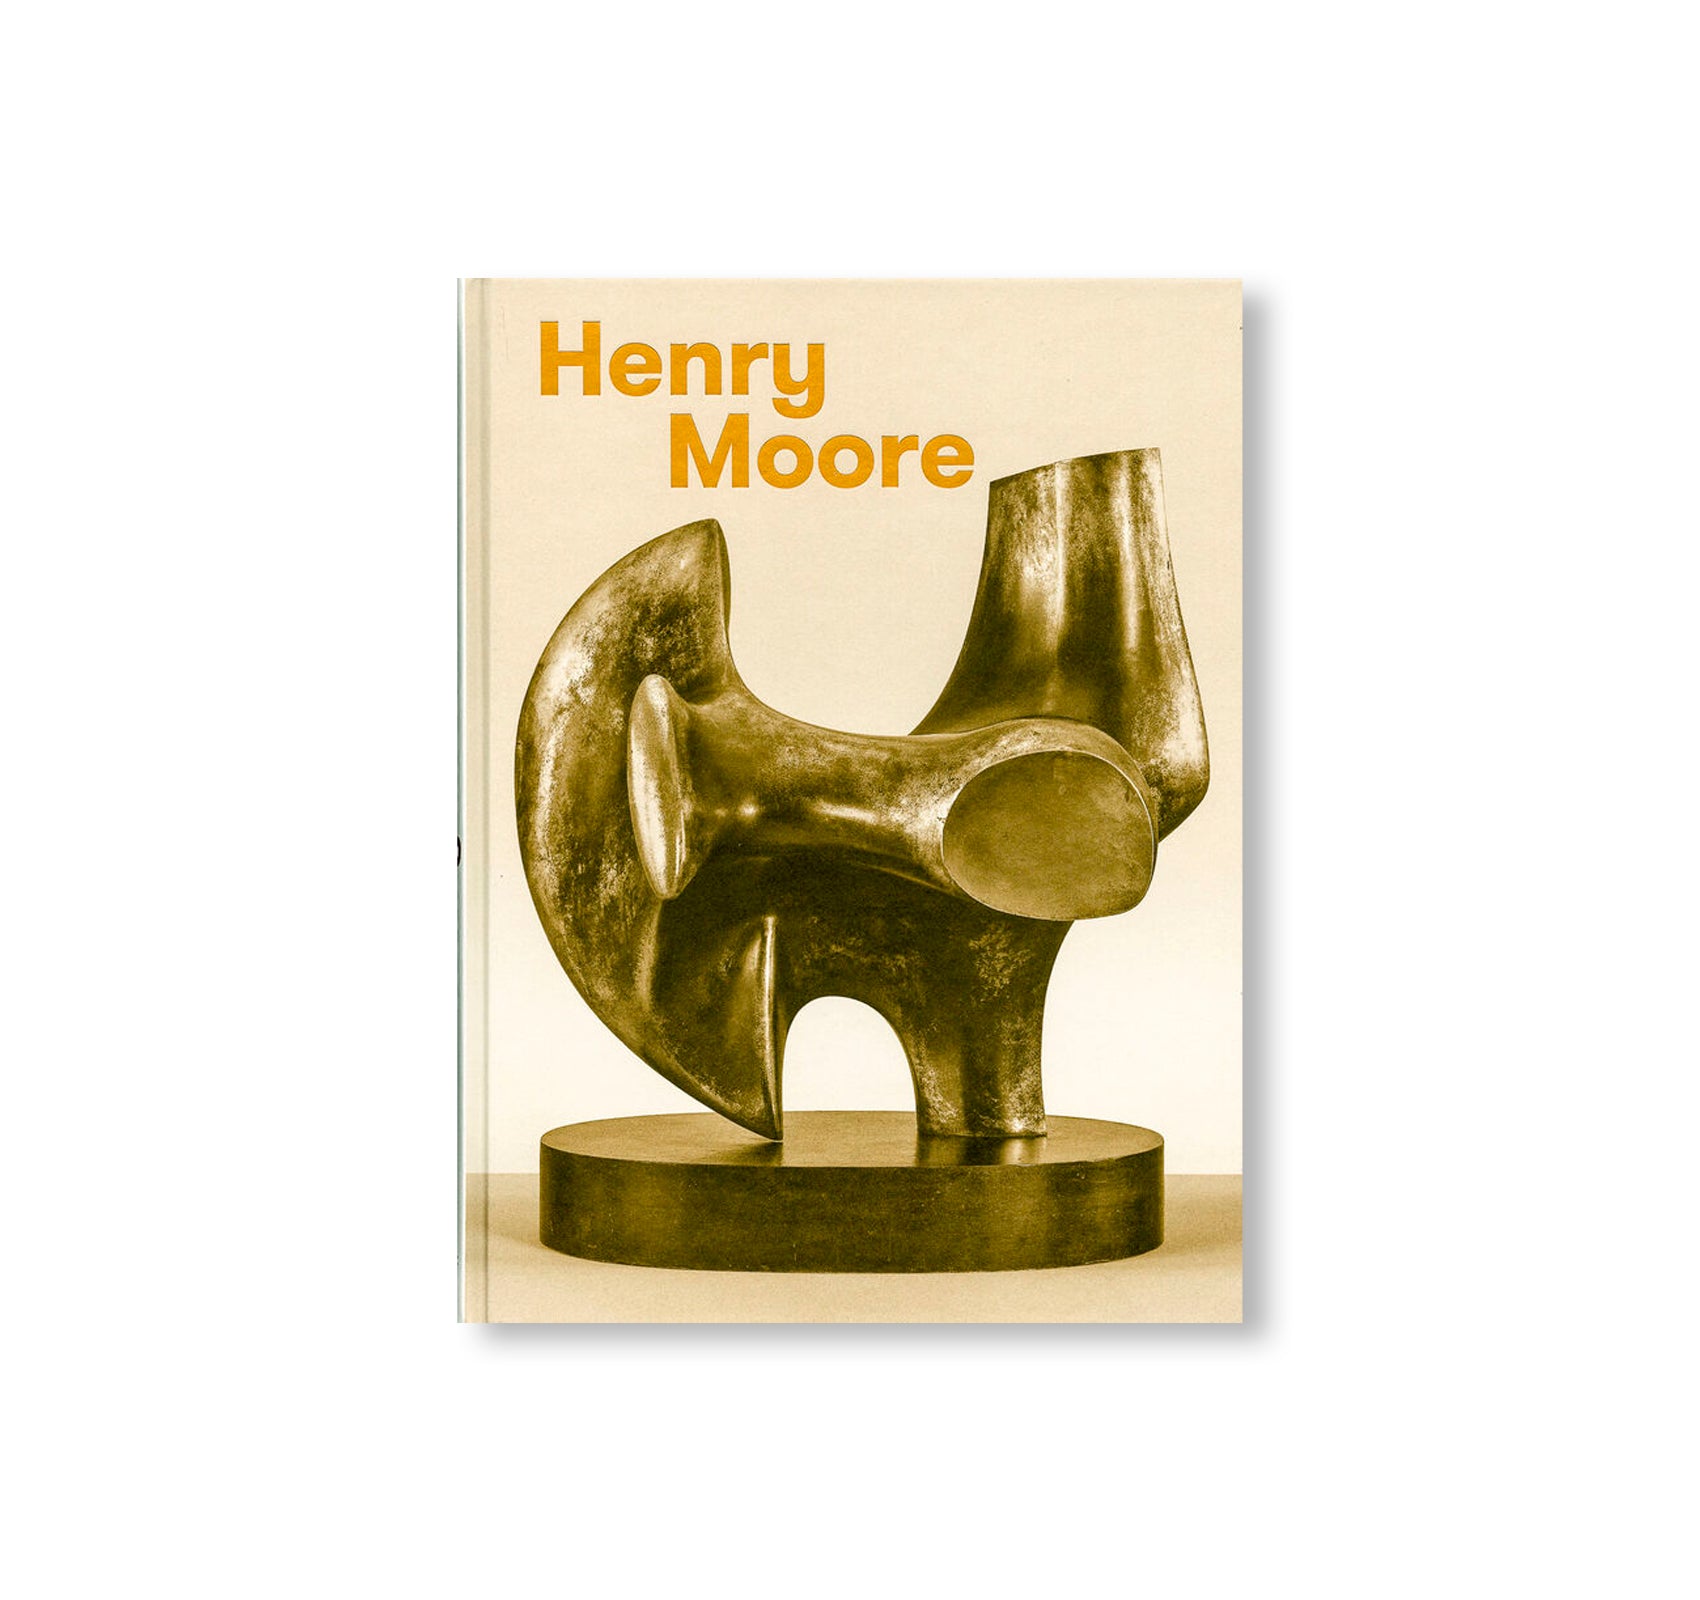 HENRY MOORE by Henry Moore